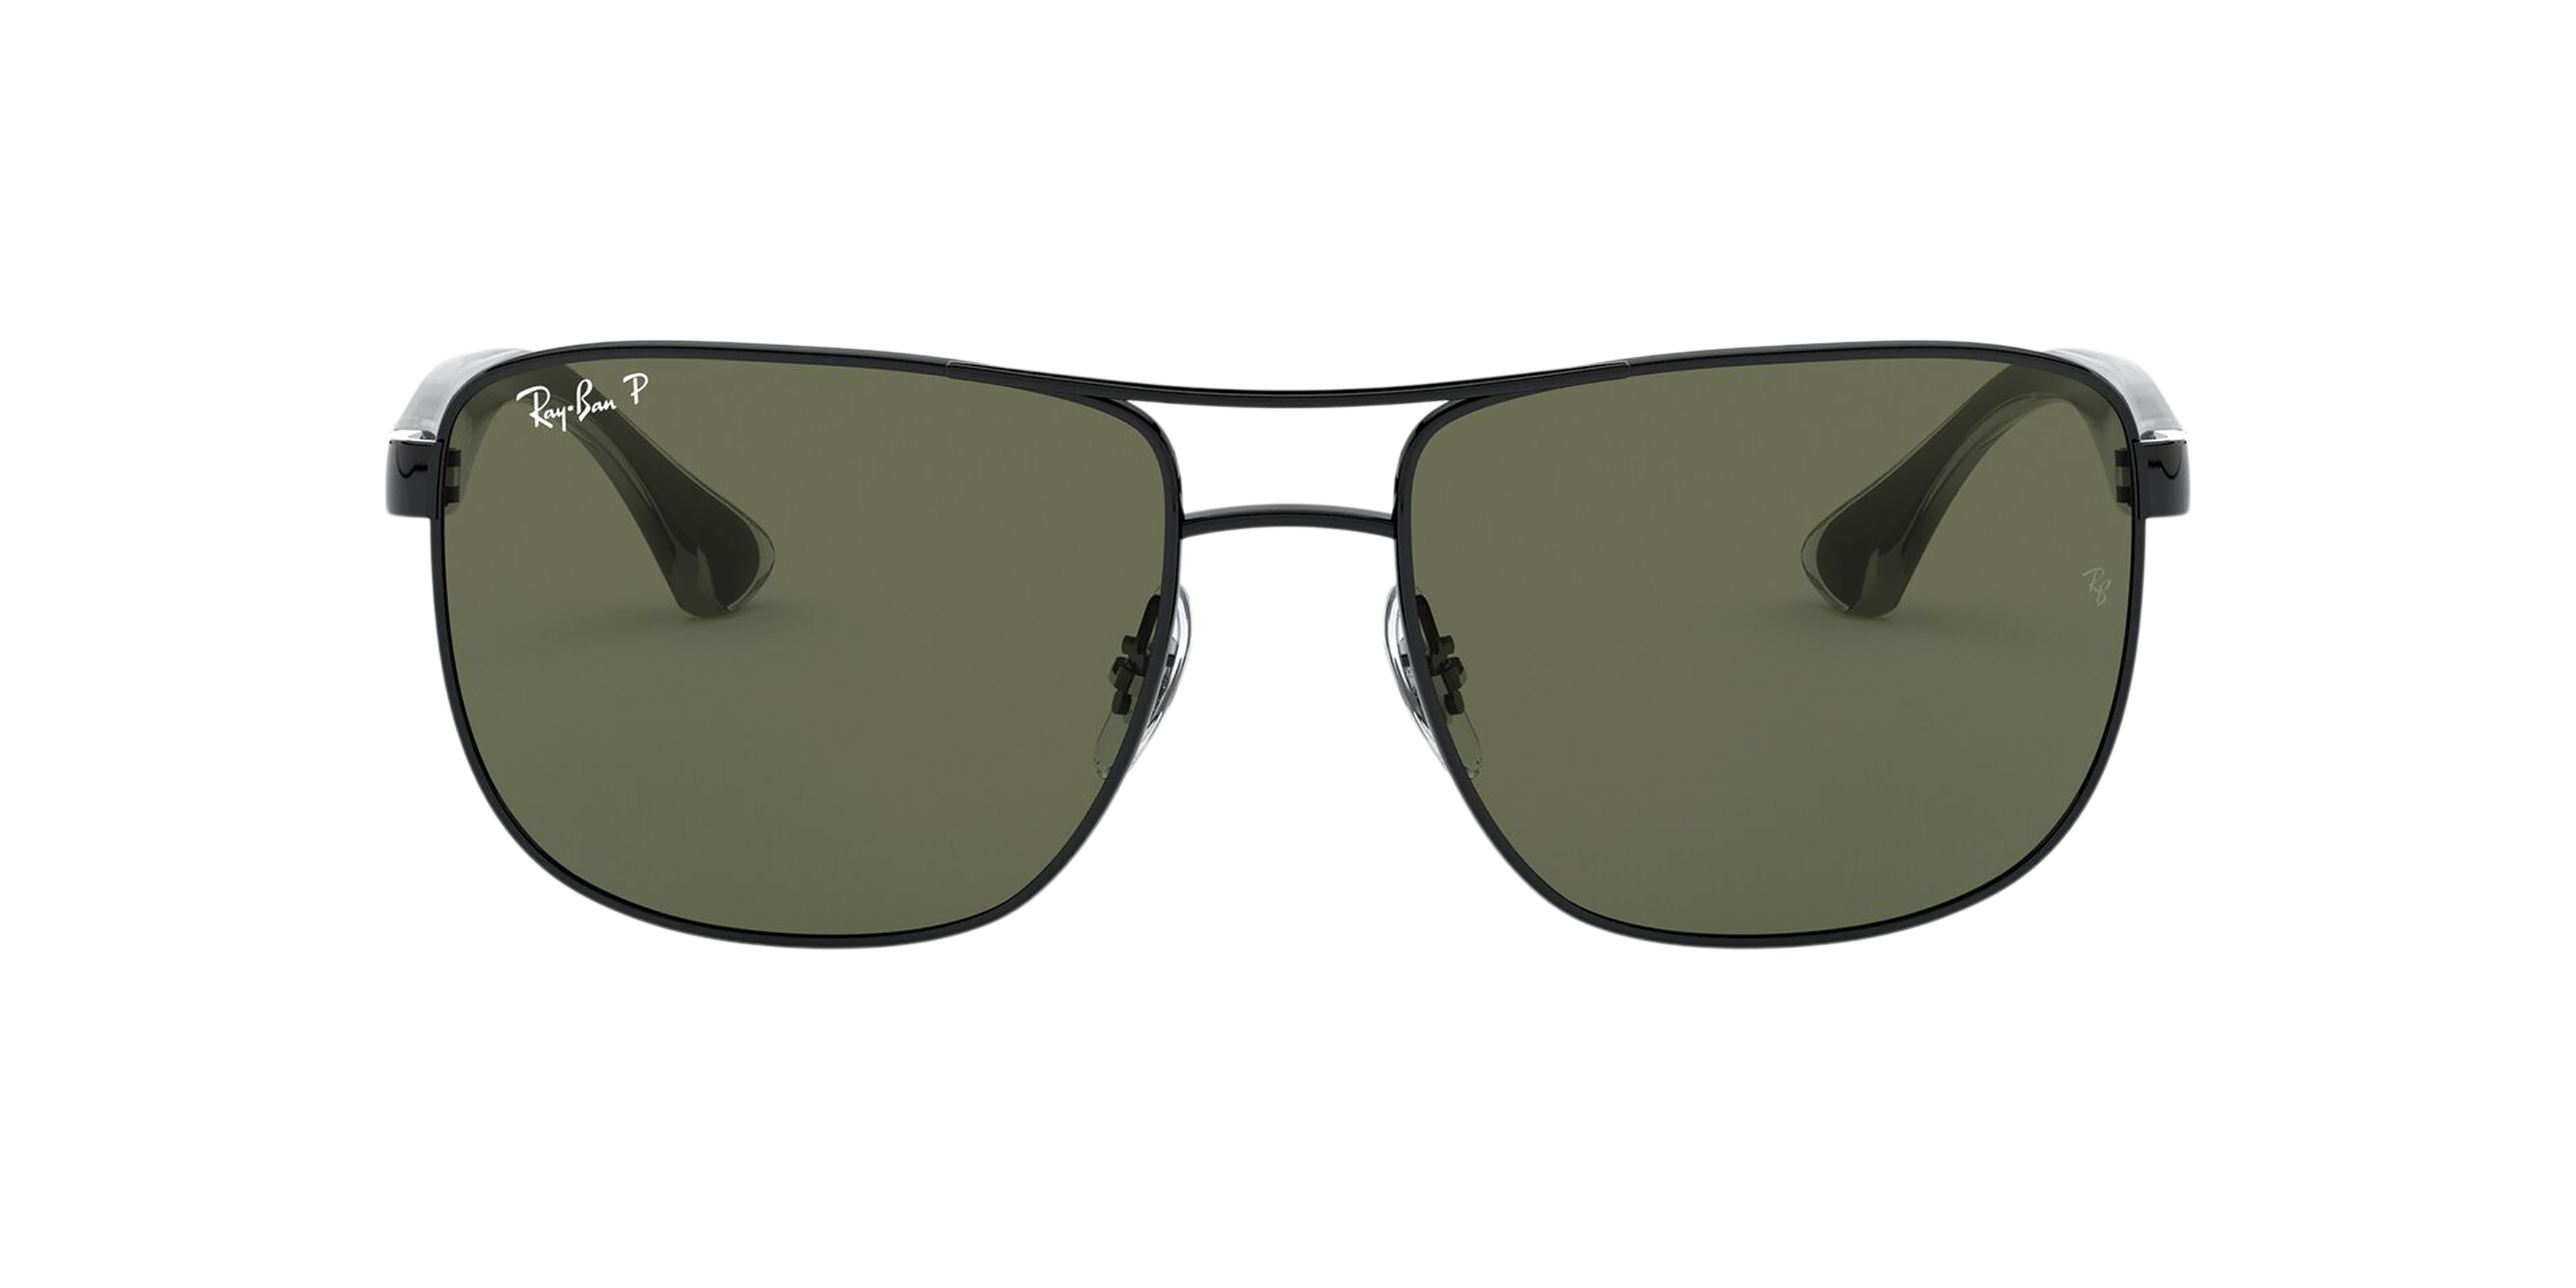 [products.image.front] Ray-Ban RB3533 002/9A